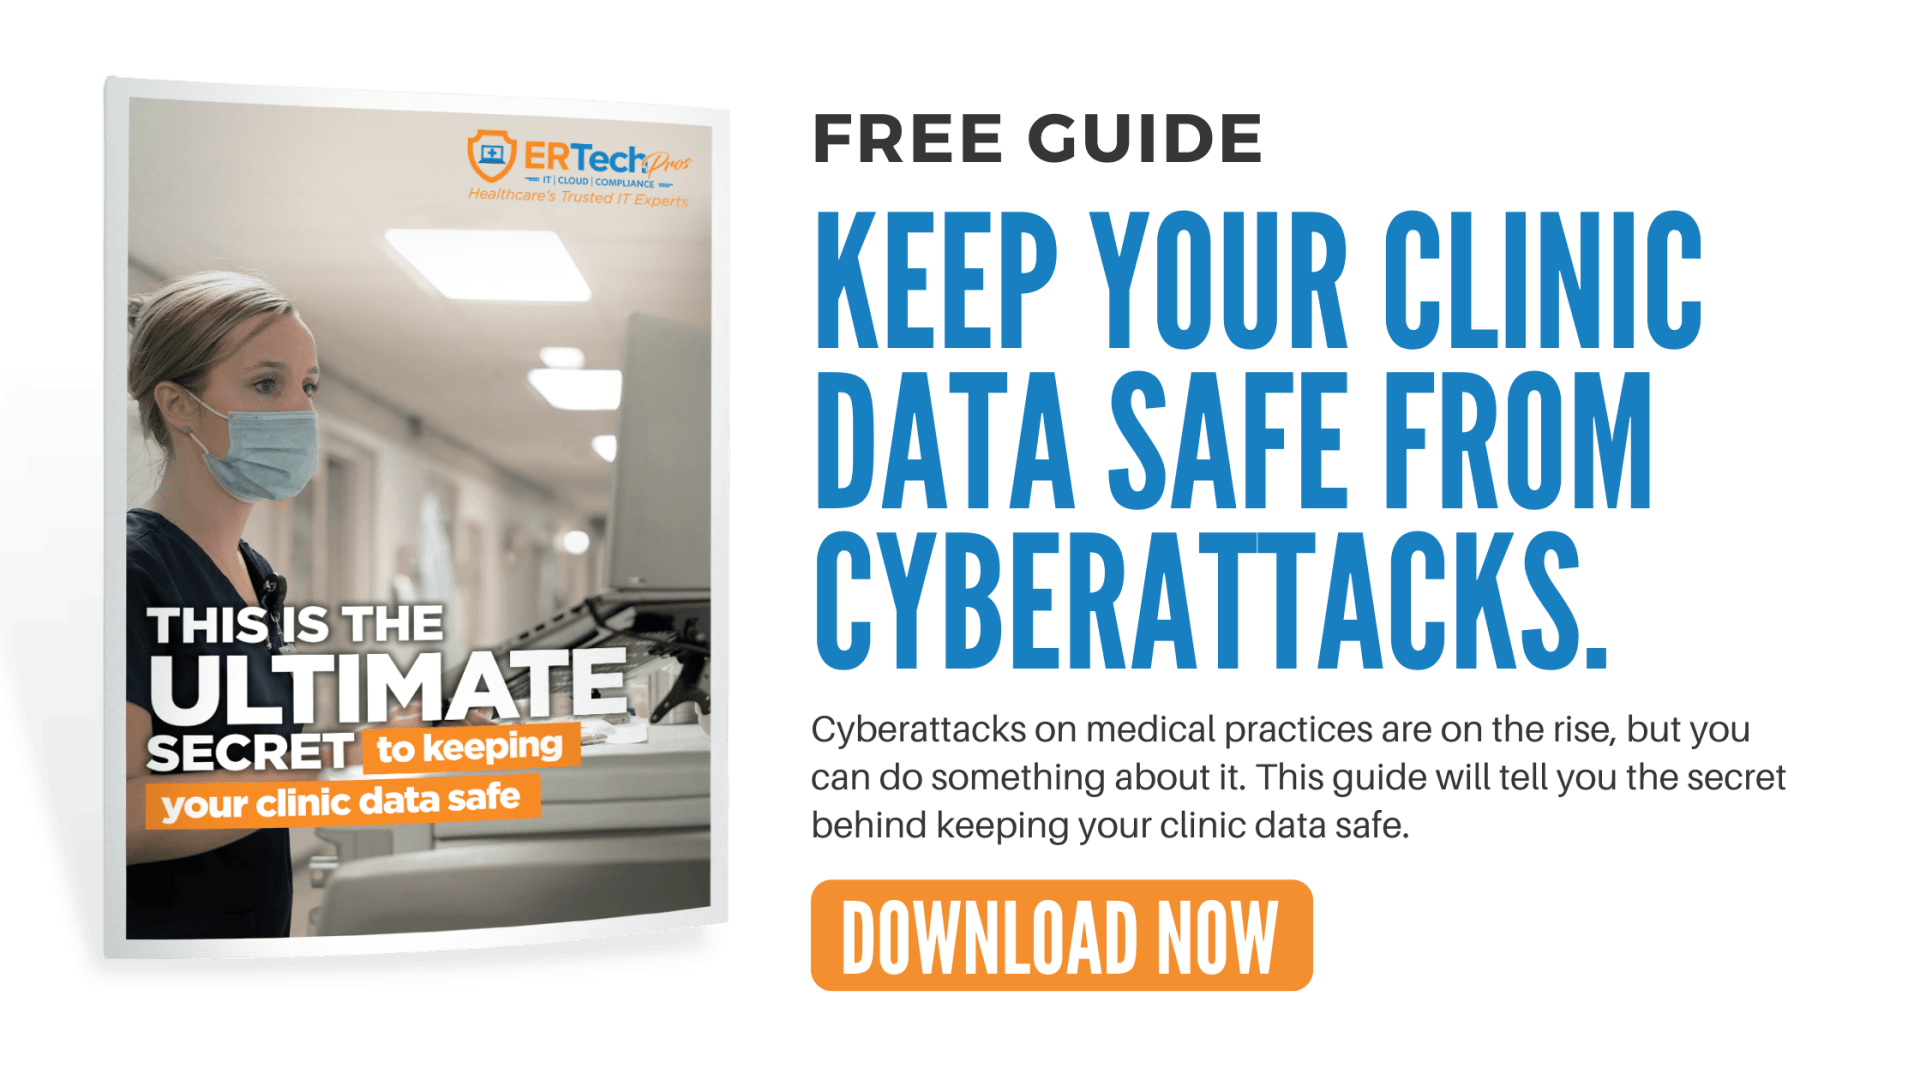 Download this free guide by ER Tech Pros to protect your medical practice from cyberattacks.